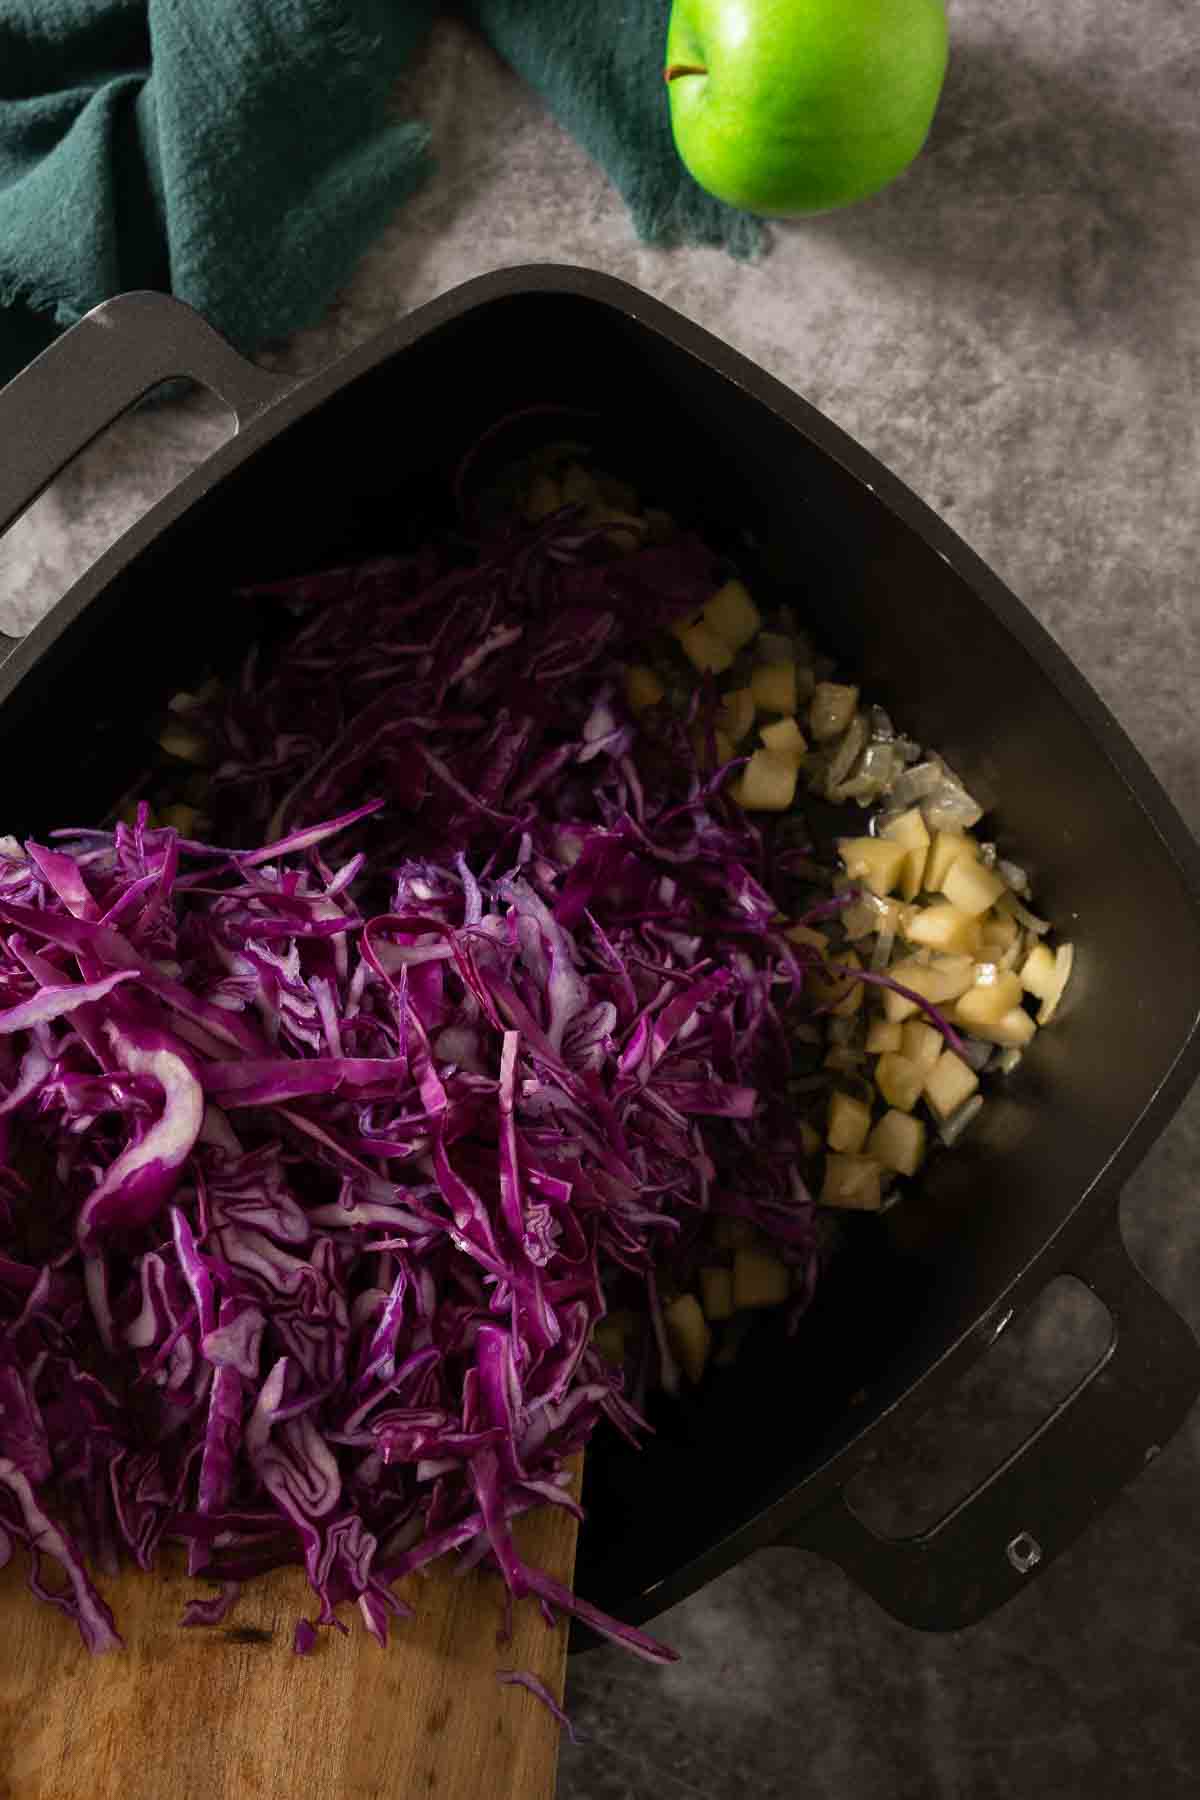 Shredded red cabbage being added to veggies in black pot.